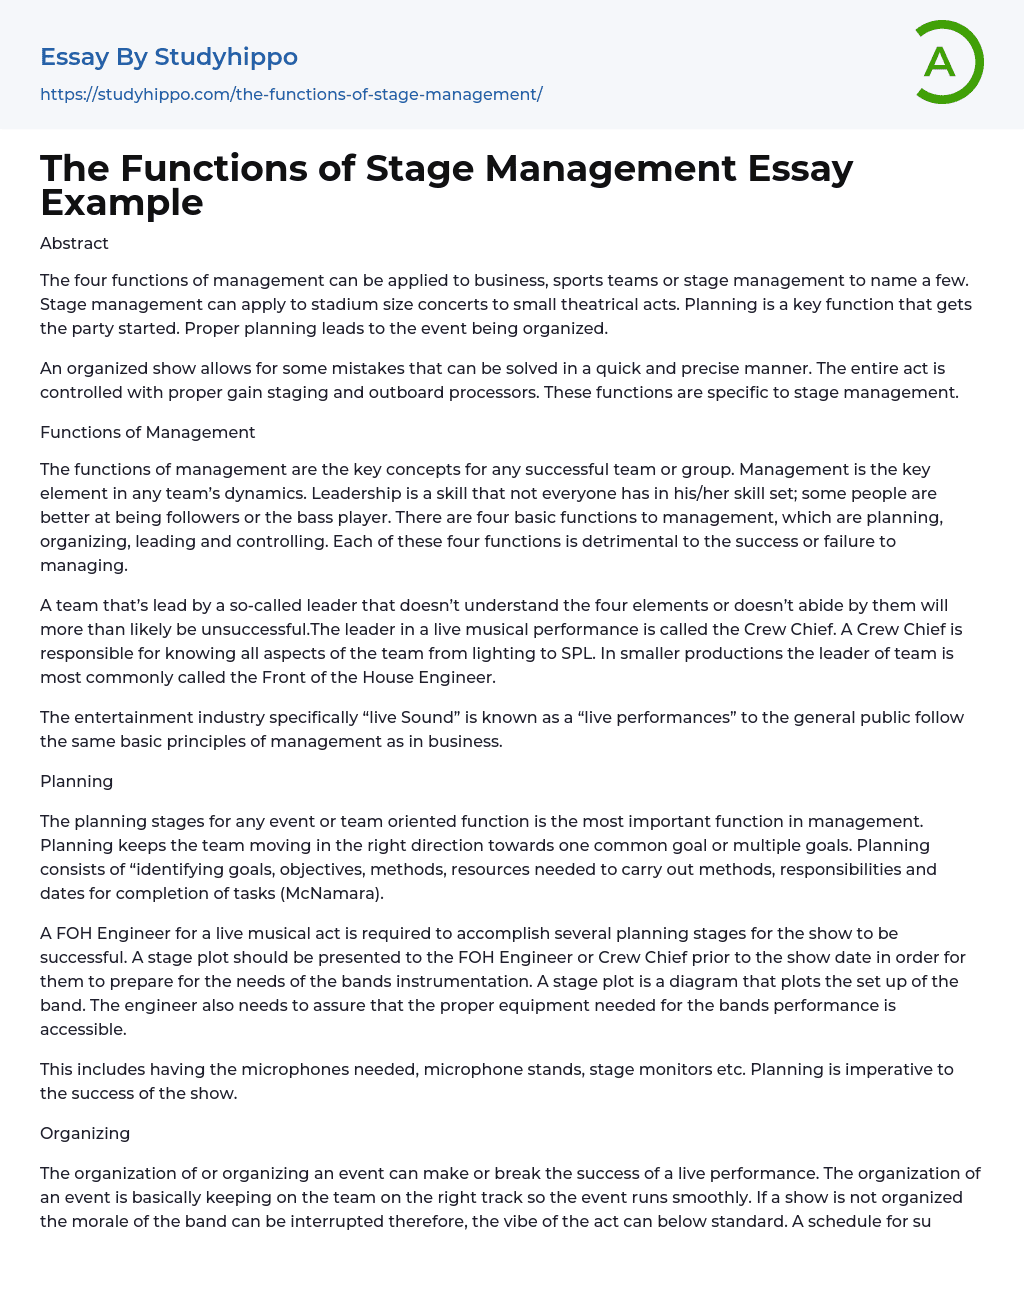 The Functions of Stage Management Essay Example